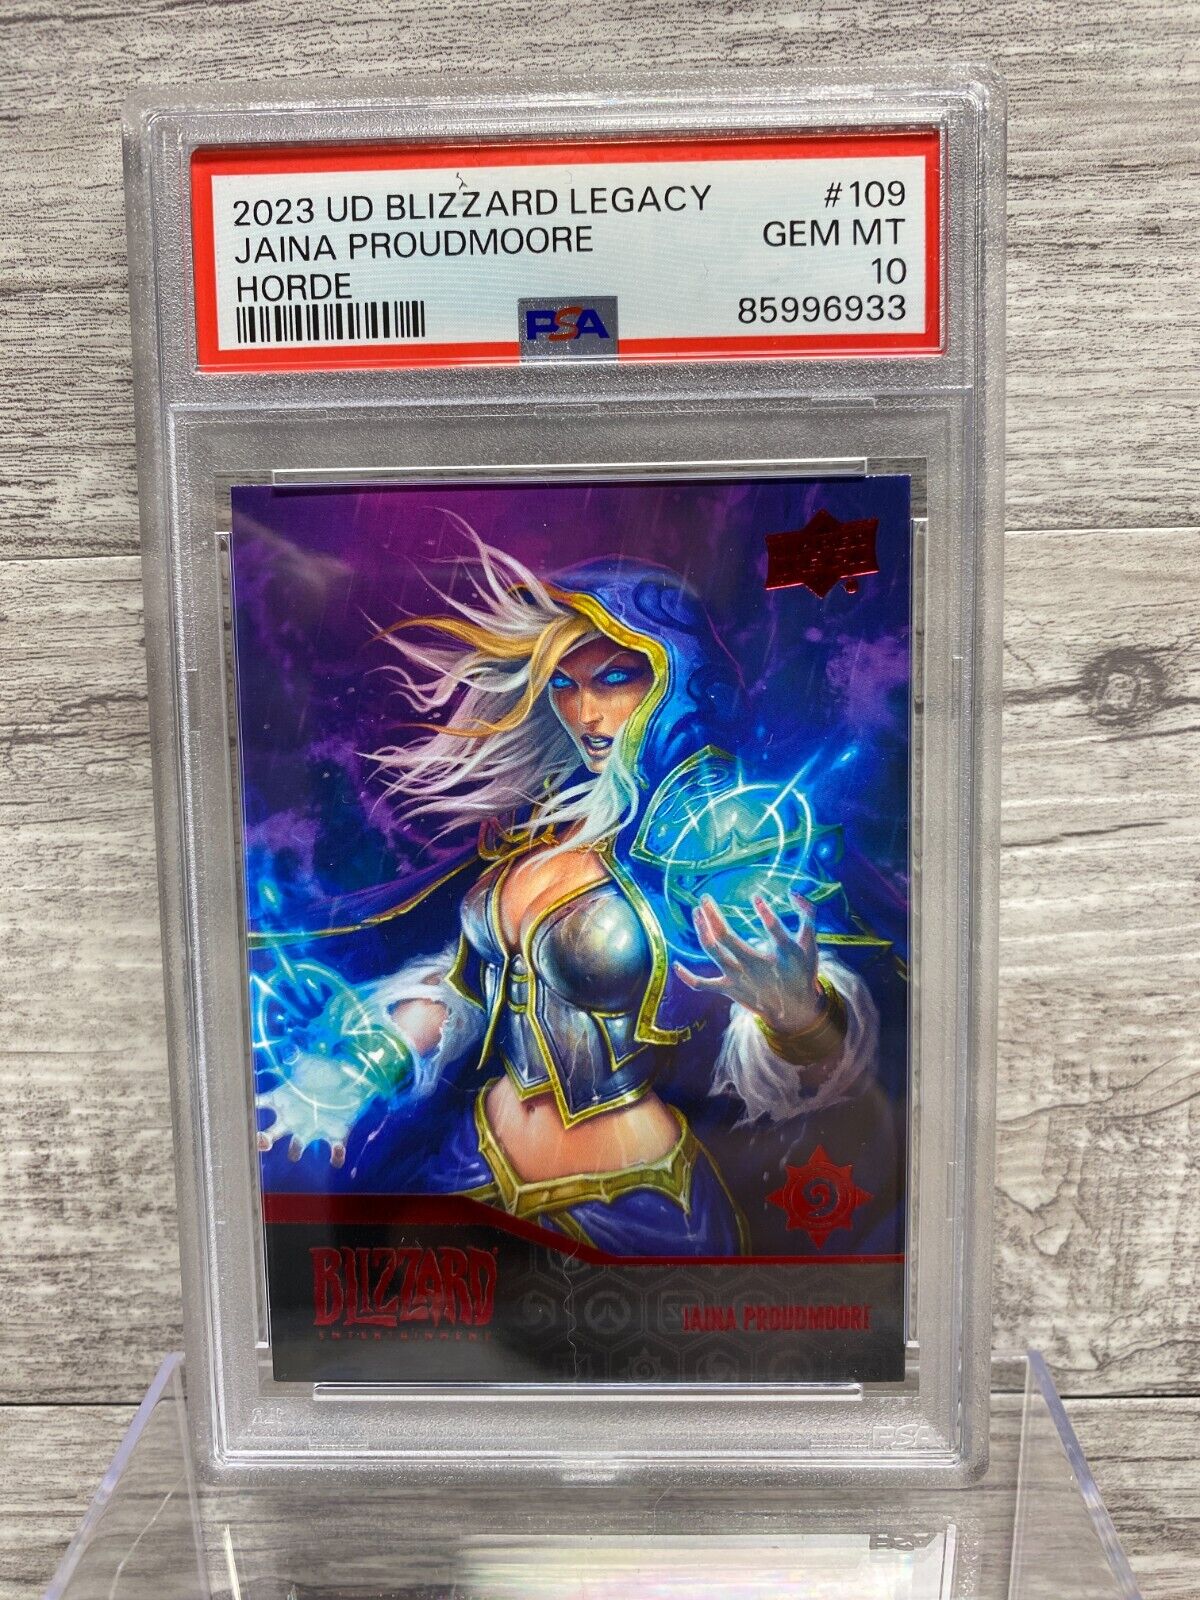 2023 Upper Deck Blizzard Legacy Collection 109 Horde Red Jaina Proudmoore PSA 10